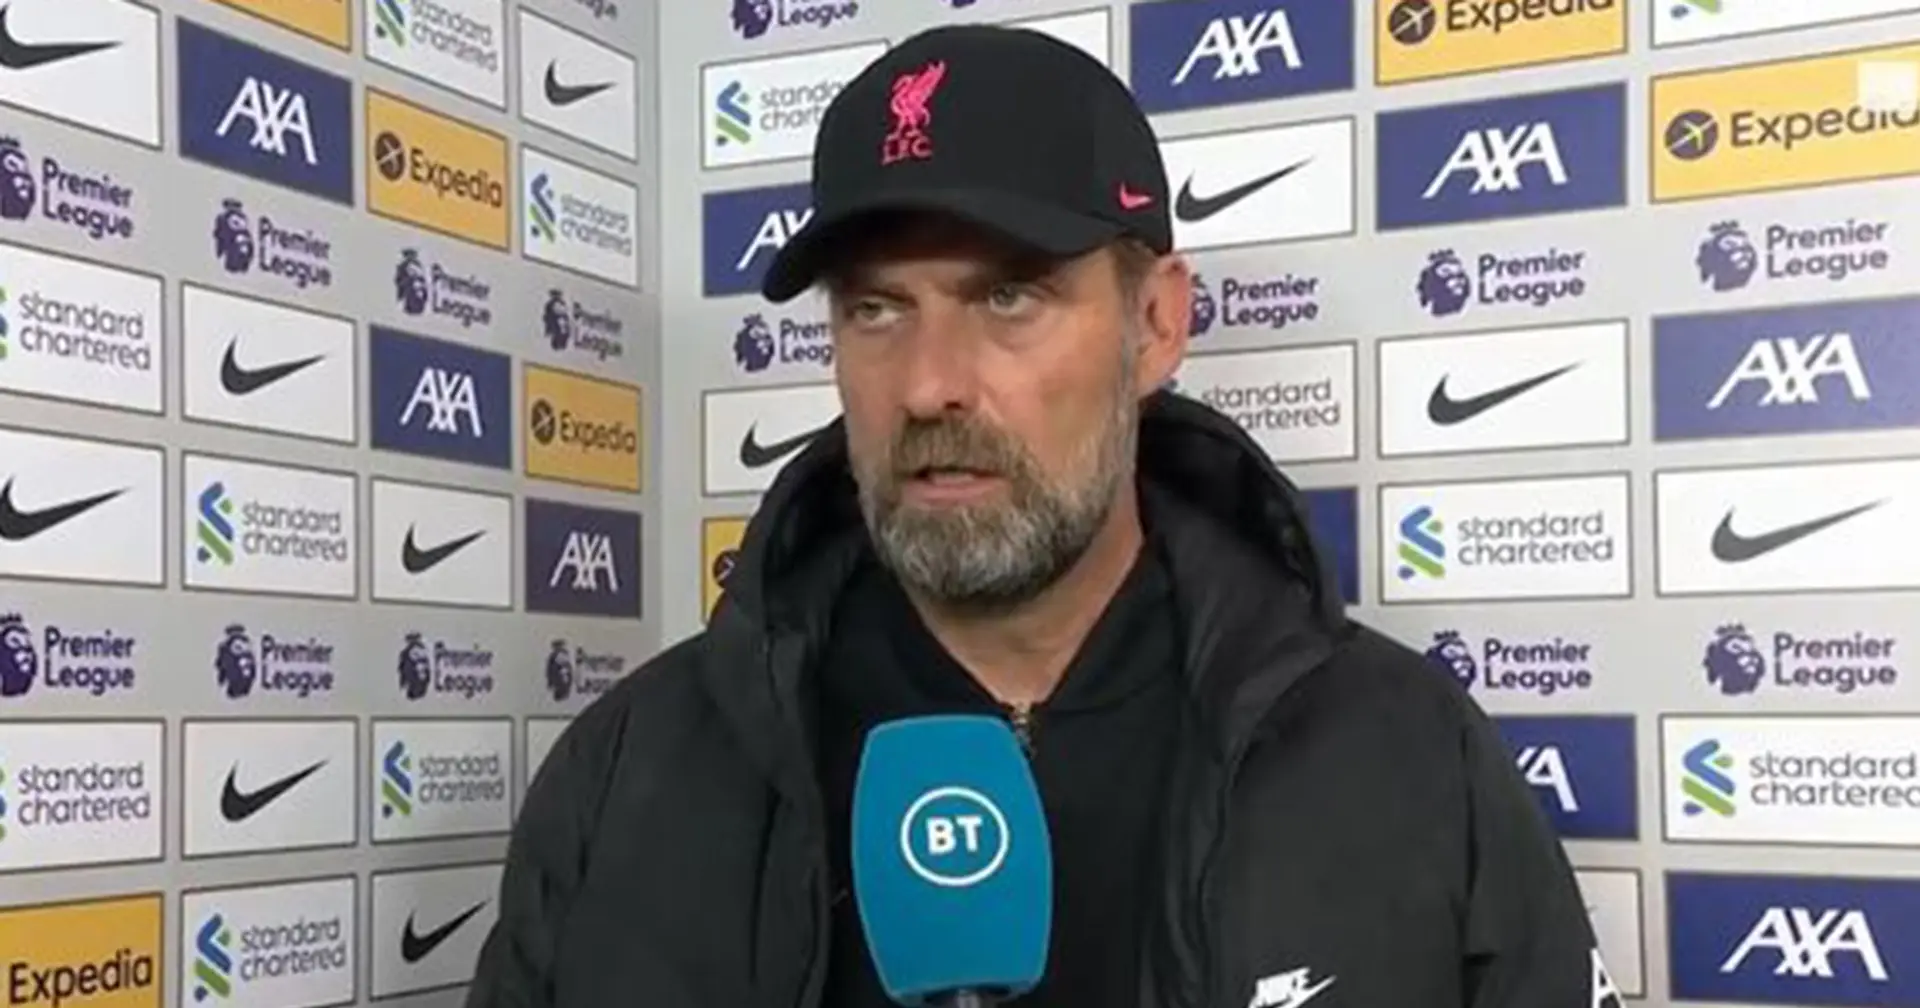 'I have to explain it but I can't': Klopp on 4-1 loss to Man City